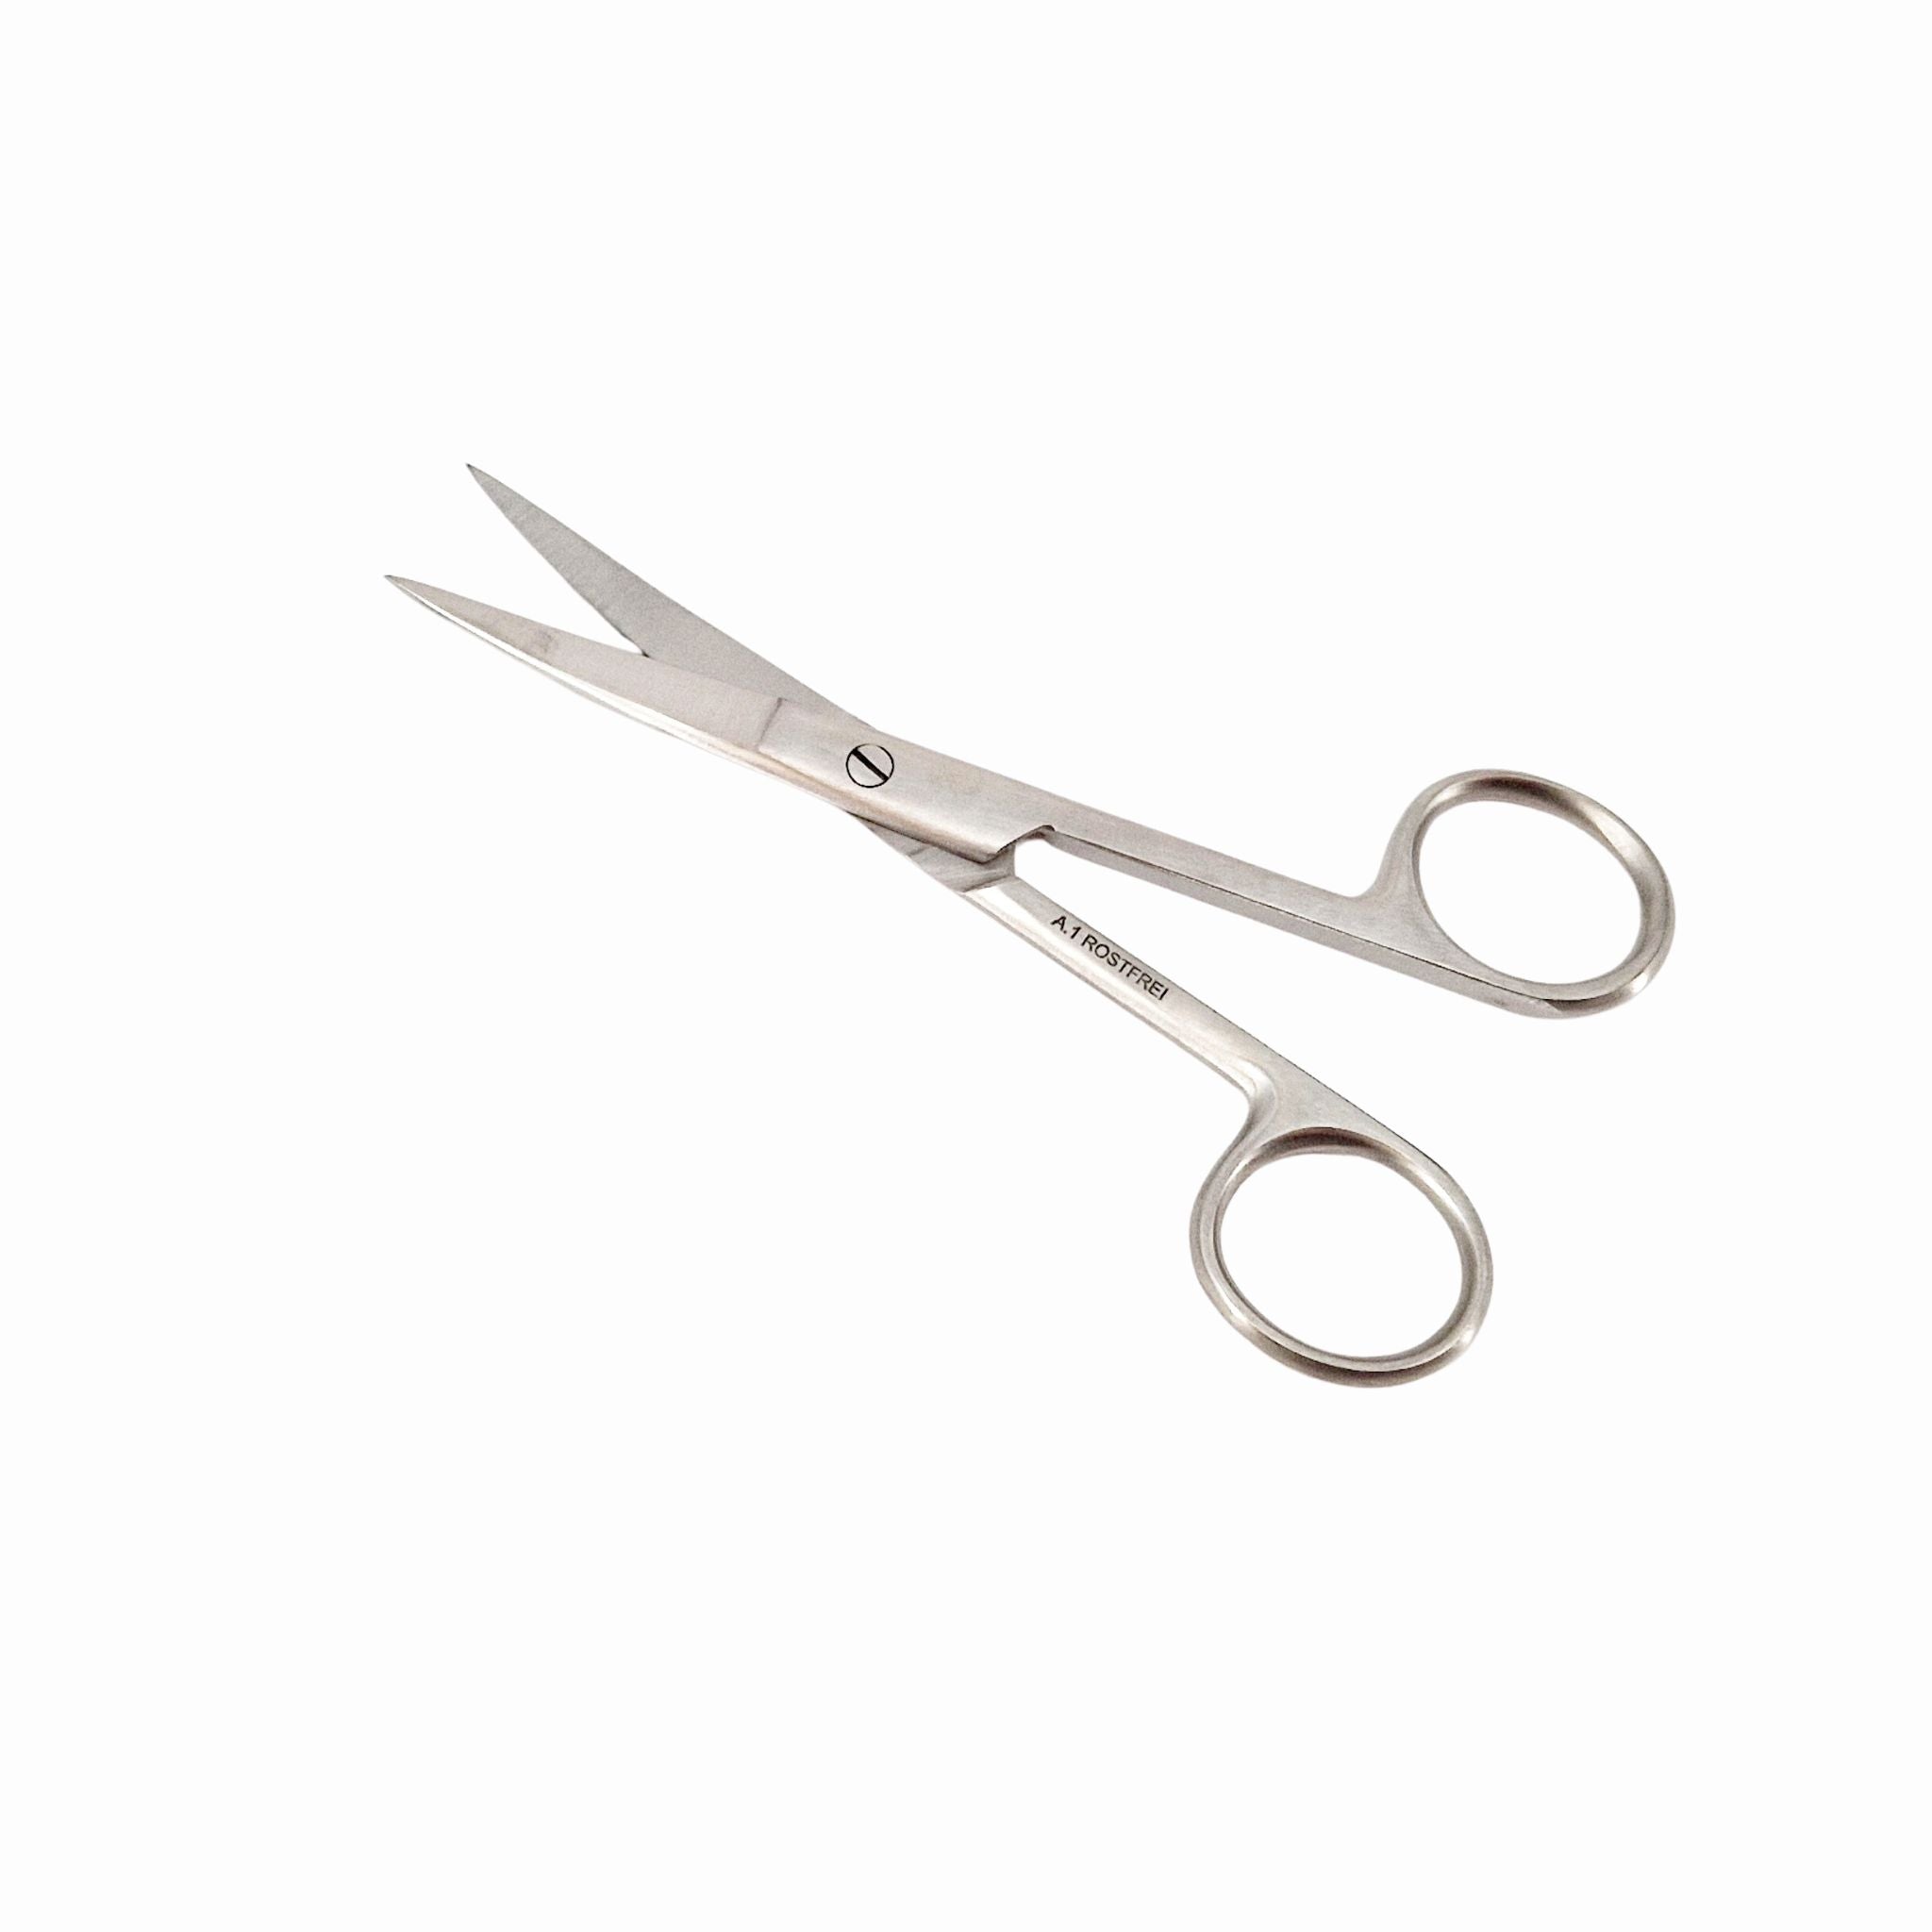 Lavabis surgical scissors curved stainless steel